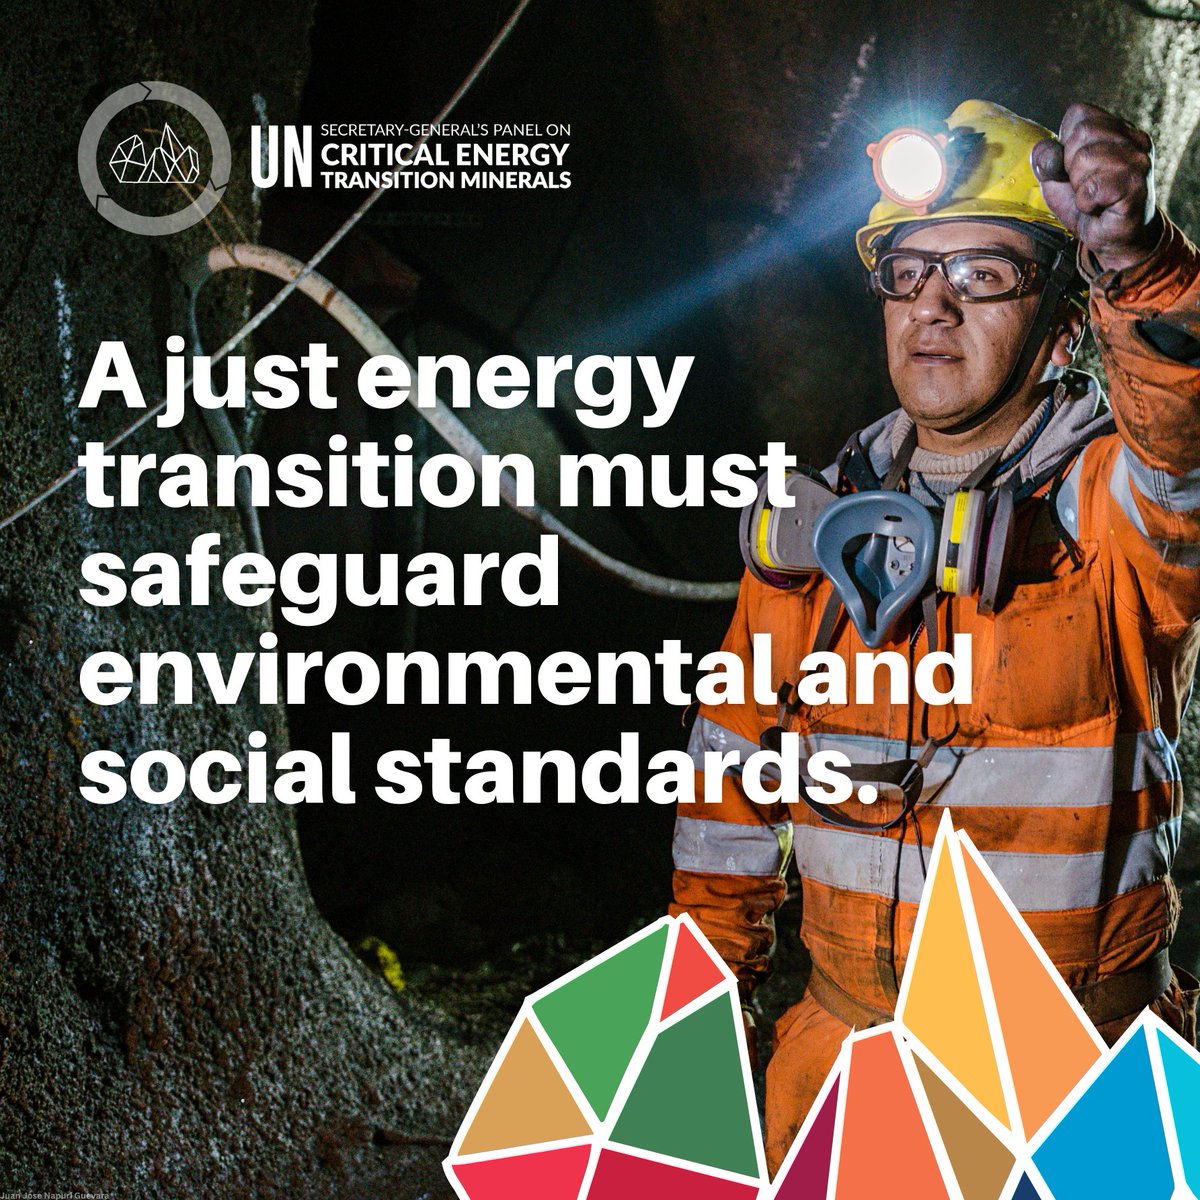 News: @UN panel members now appointed to take up the issues of equity, sustainability and human rights across the value chains of the minerals critical for global energy transition and #ClimateAction - such as copper, lithium, nickel, and cobalt: unep.org/news-and-stori…